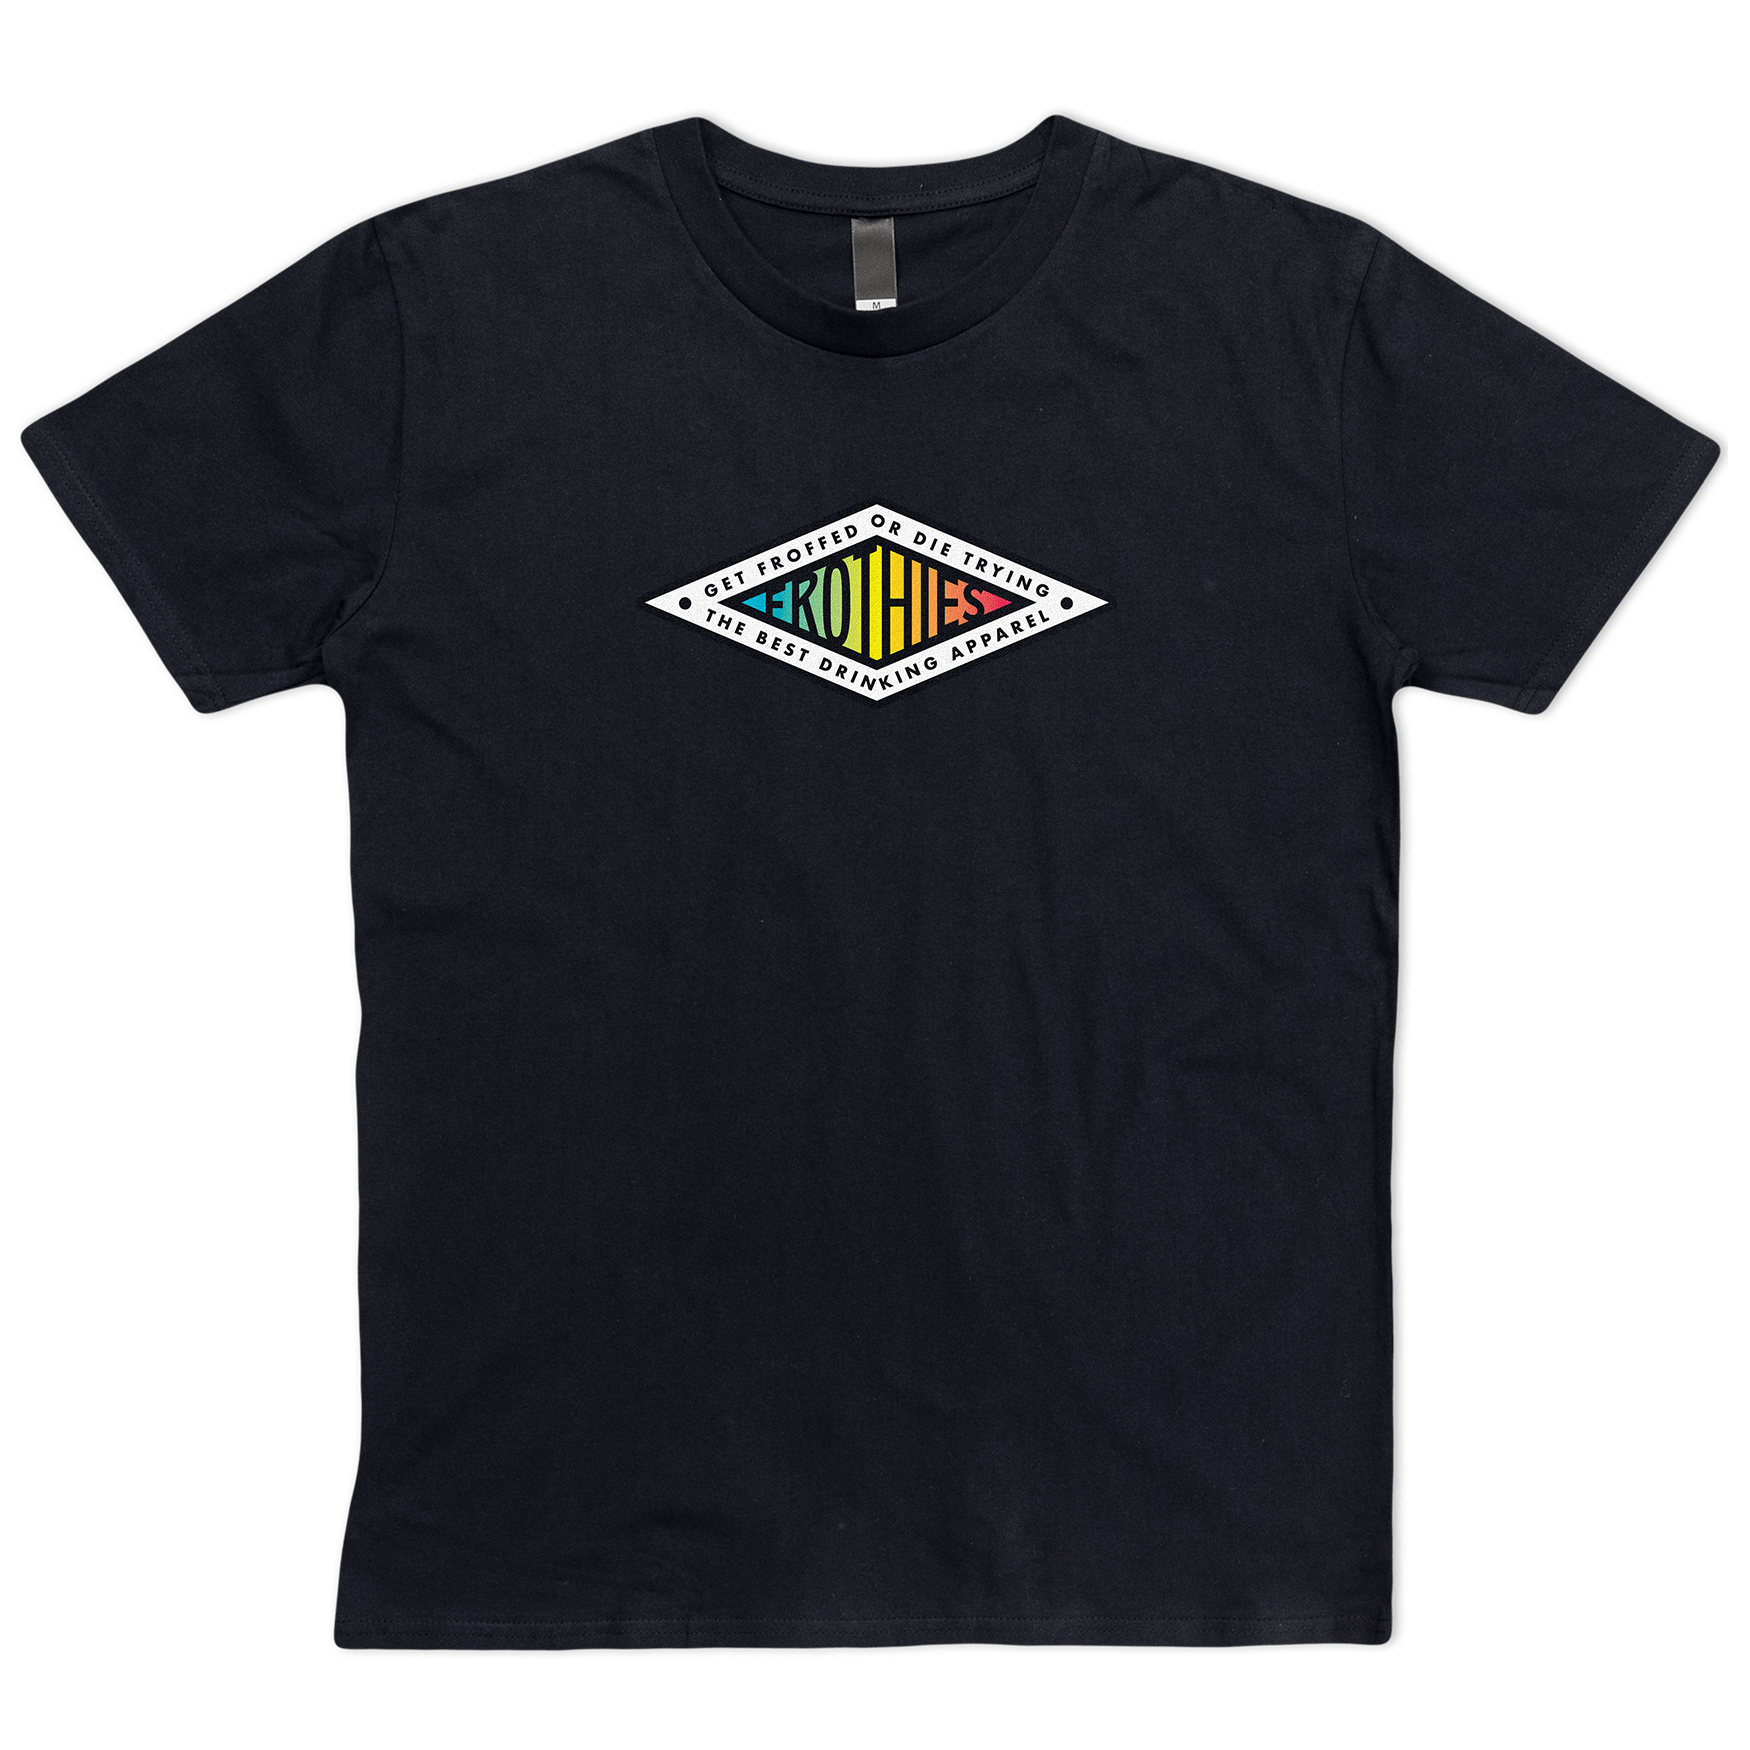 Breathalyser Tee T-Shirt Frothies